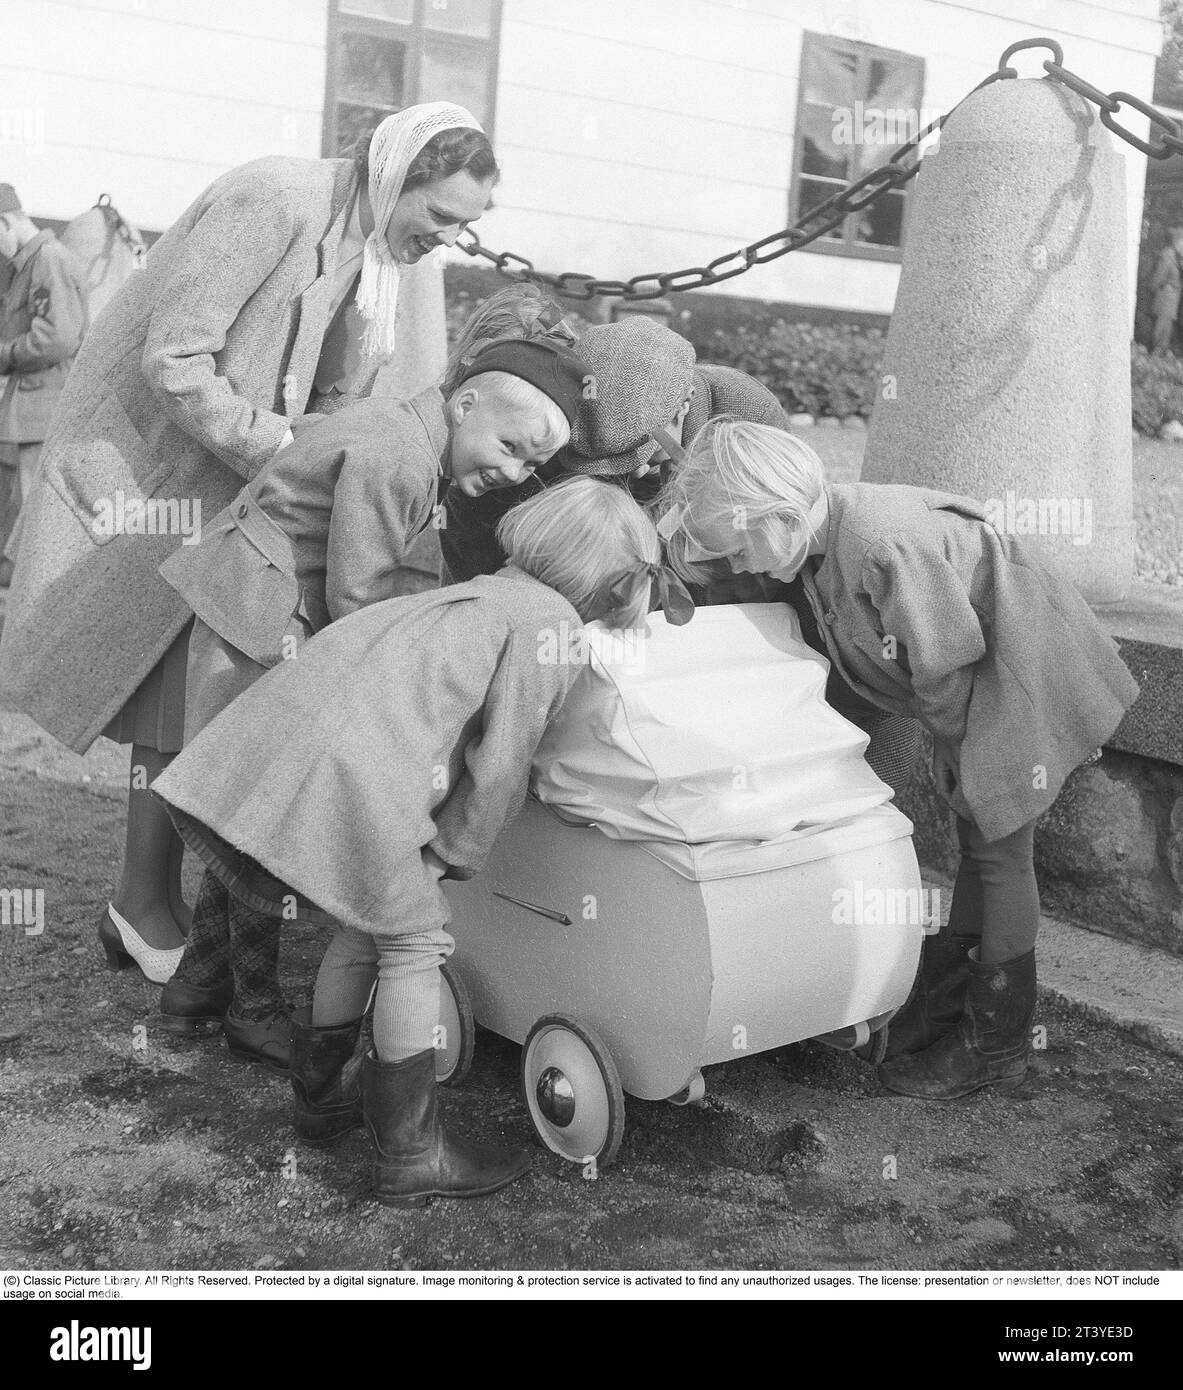 Mother in the 1940s. A young mother is seen with her baby in the carriage, surrounded by curious children who are trying to catch a glimpse of her baby. Sweden 1943. Kristoffersson ref E90-3 Stock Photo